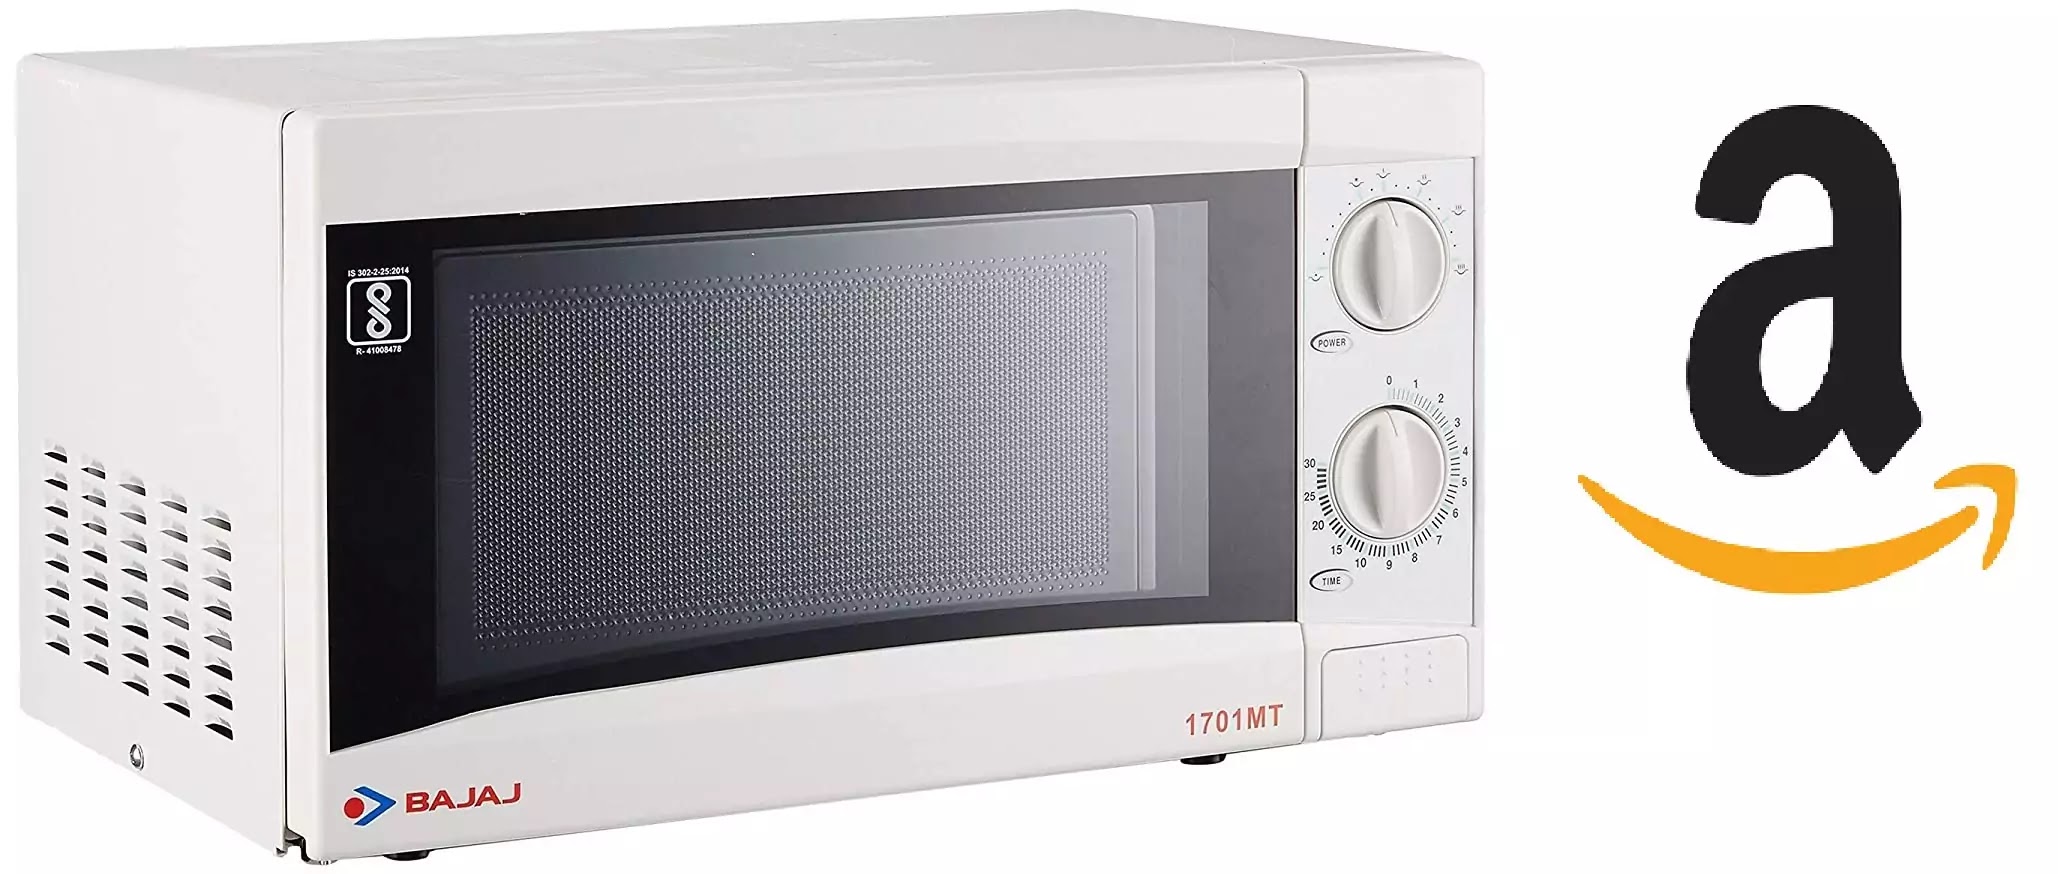 Best Microwave Oven 2021 Under 15000 In India